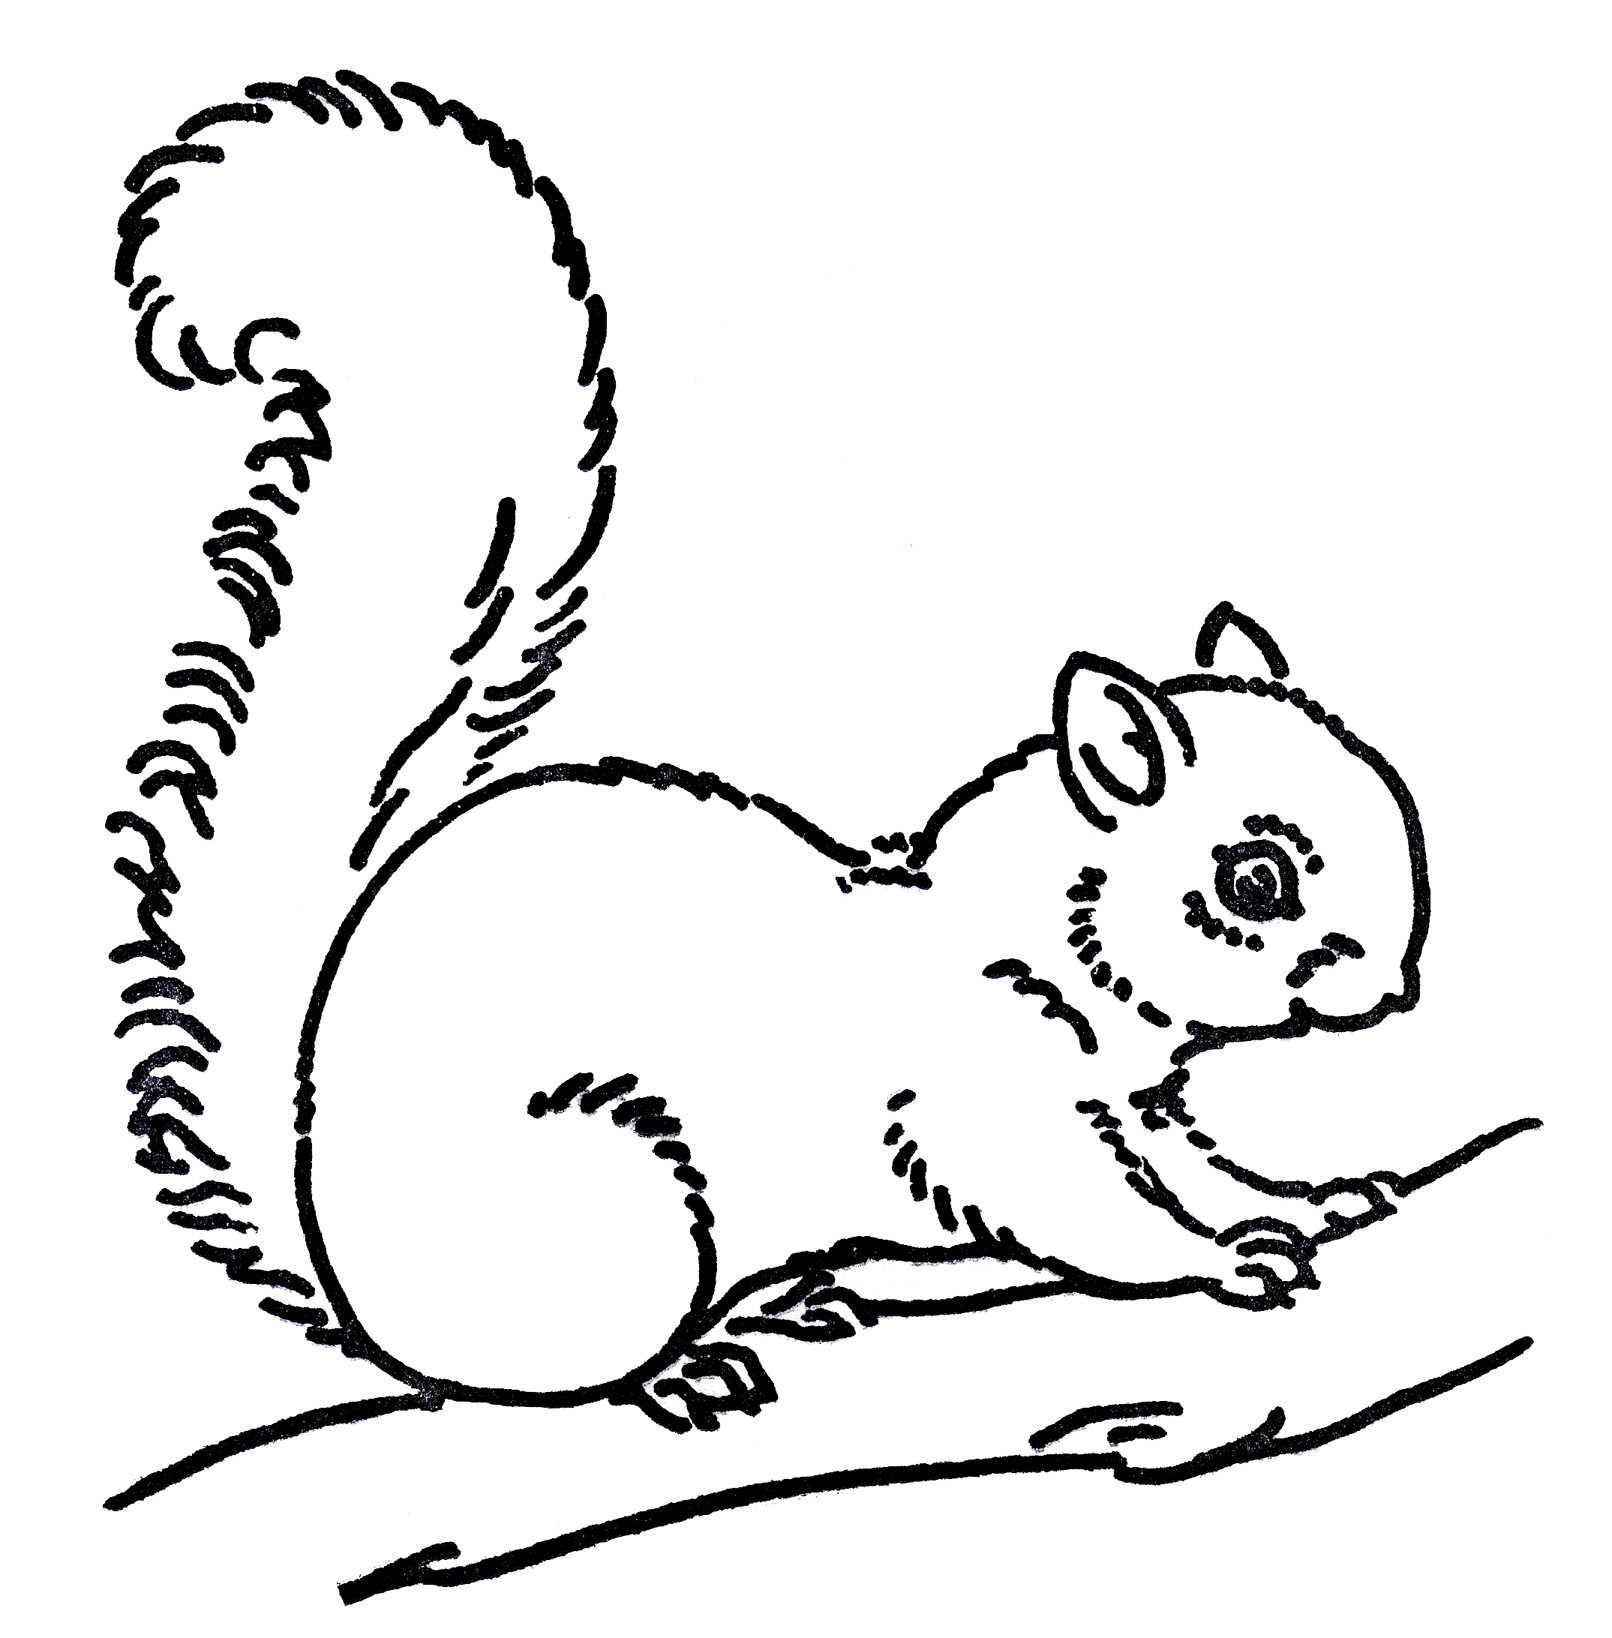 Free Black And White Squirrel Clipart, Download Free Clip.